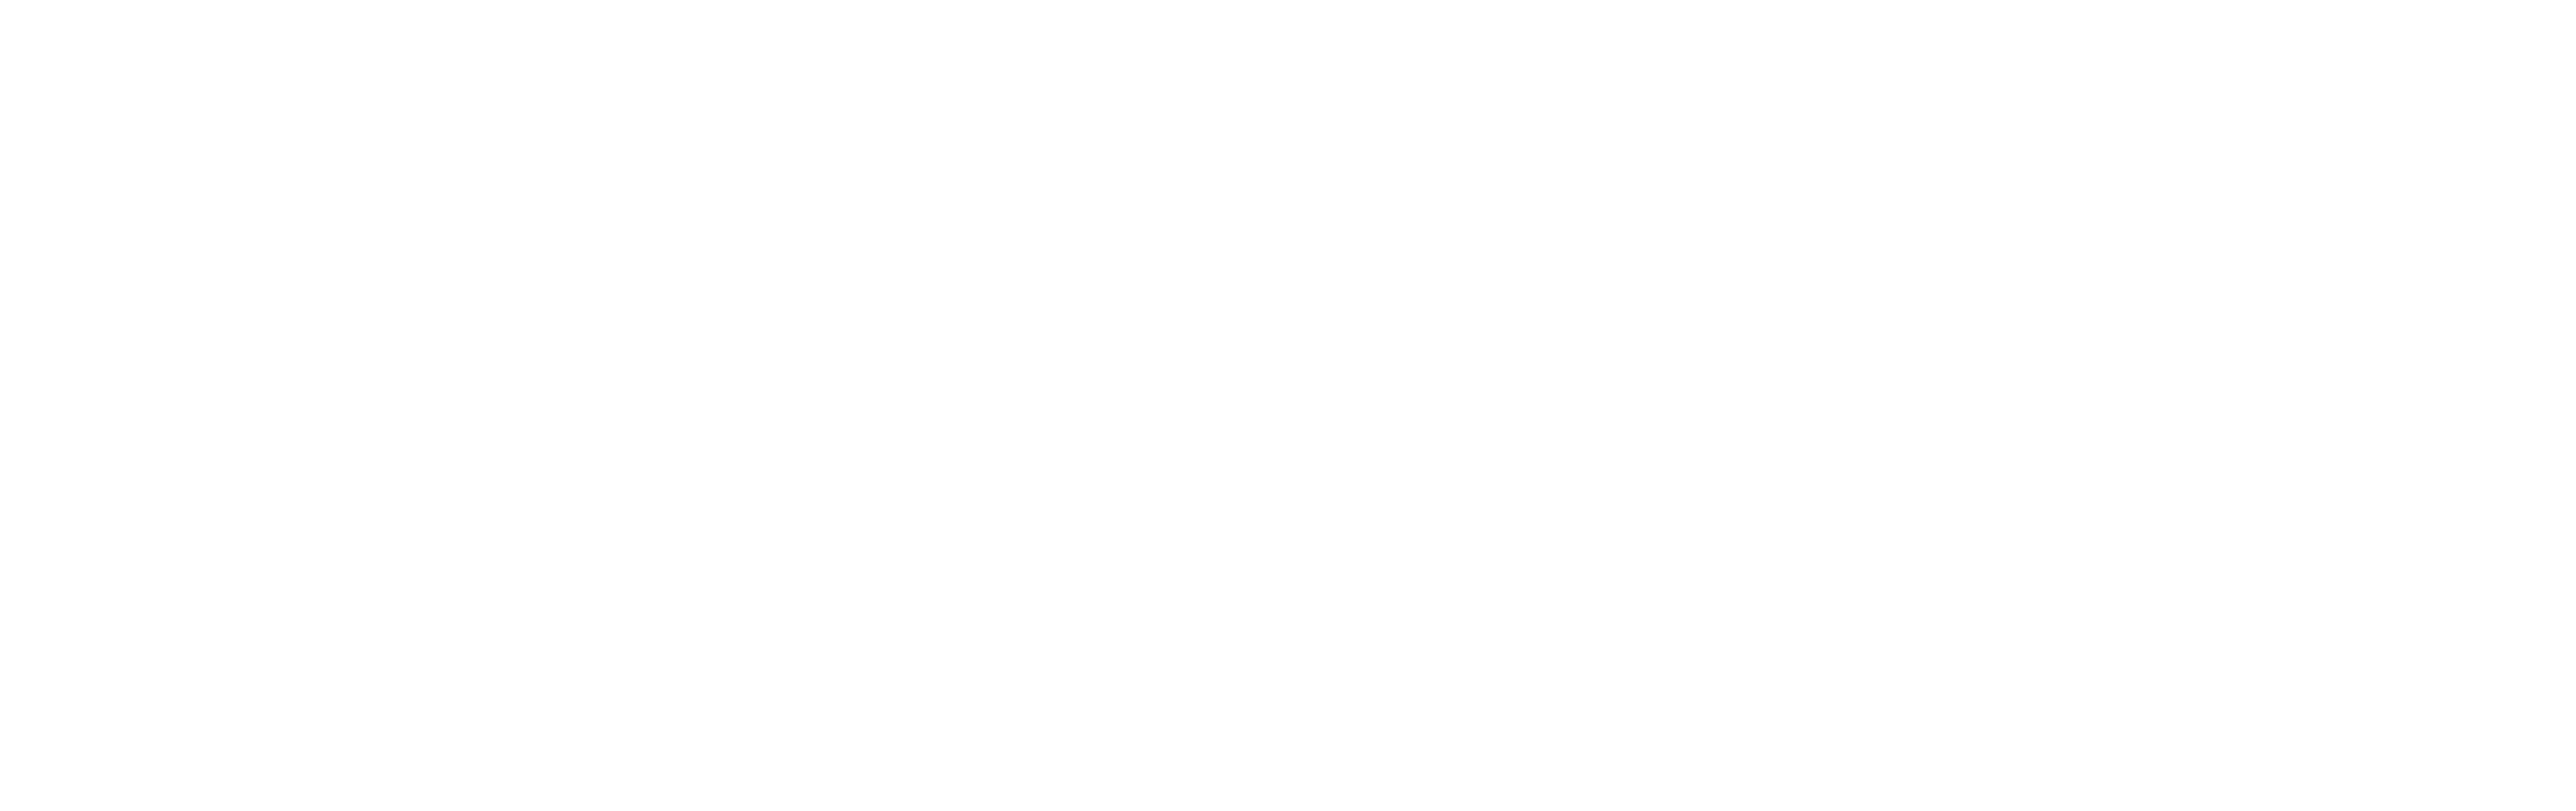 KENNEDY SEWING AND CUTTING SUPPLY, LLC - HOME PAGE
SPARTANBURG SC (USA)